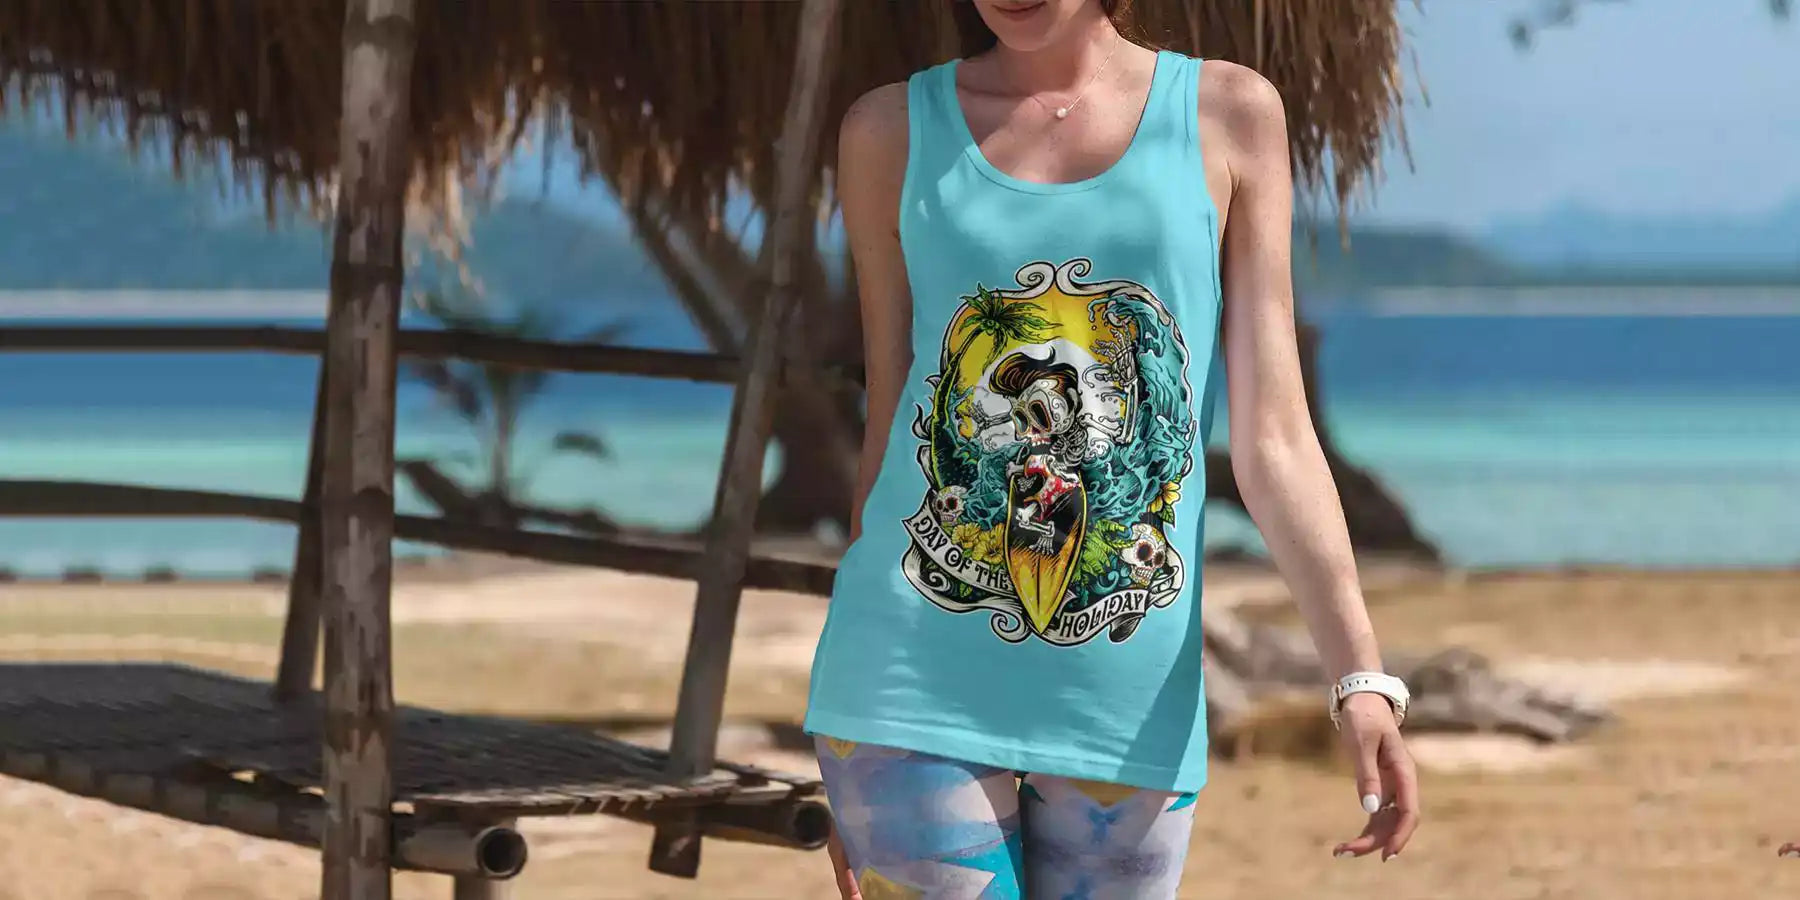 Woman is wearing a printed teal colour tank top. The tank top design is a skeleton riding a surfboard. Sea, sand and palms on the background